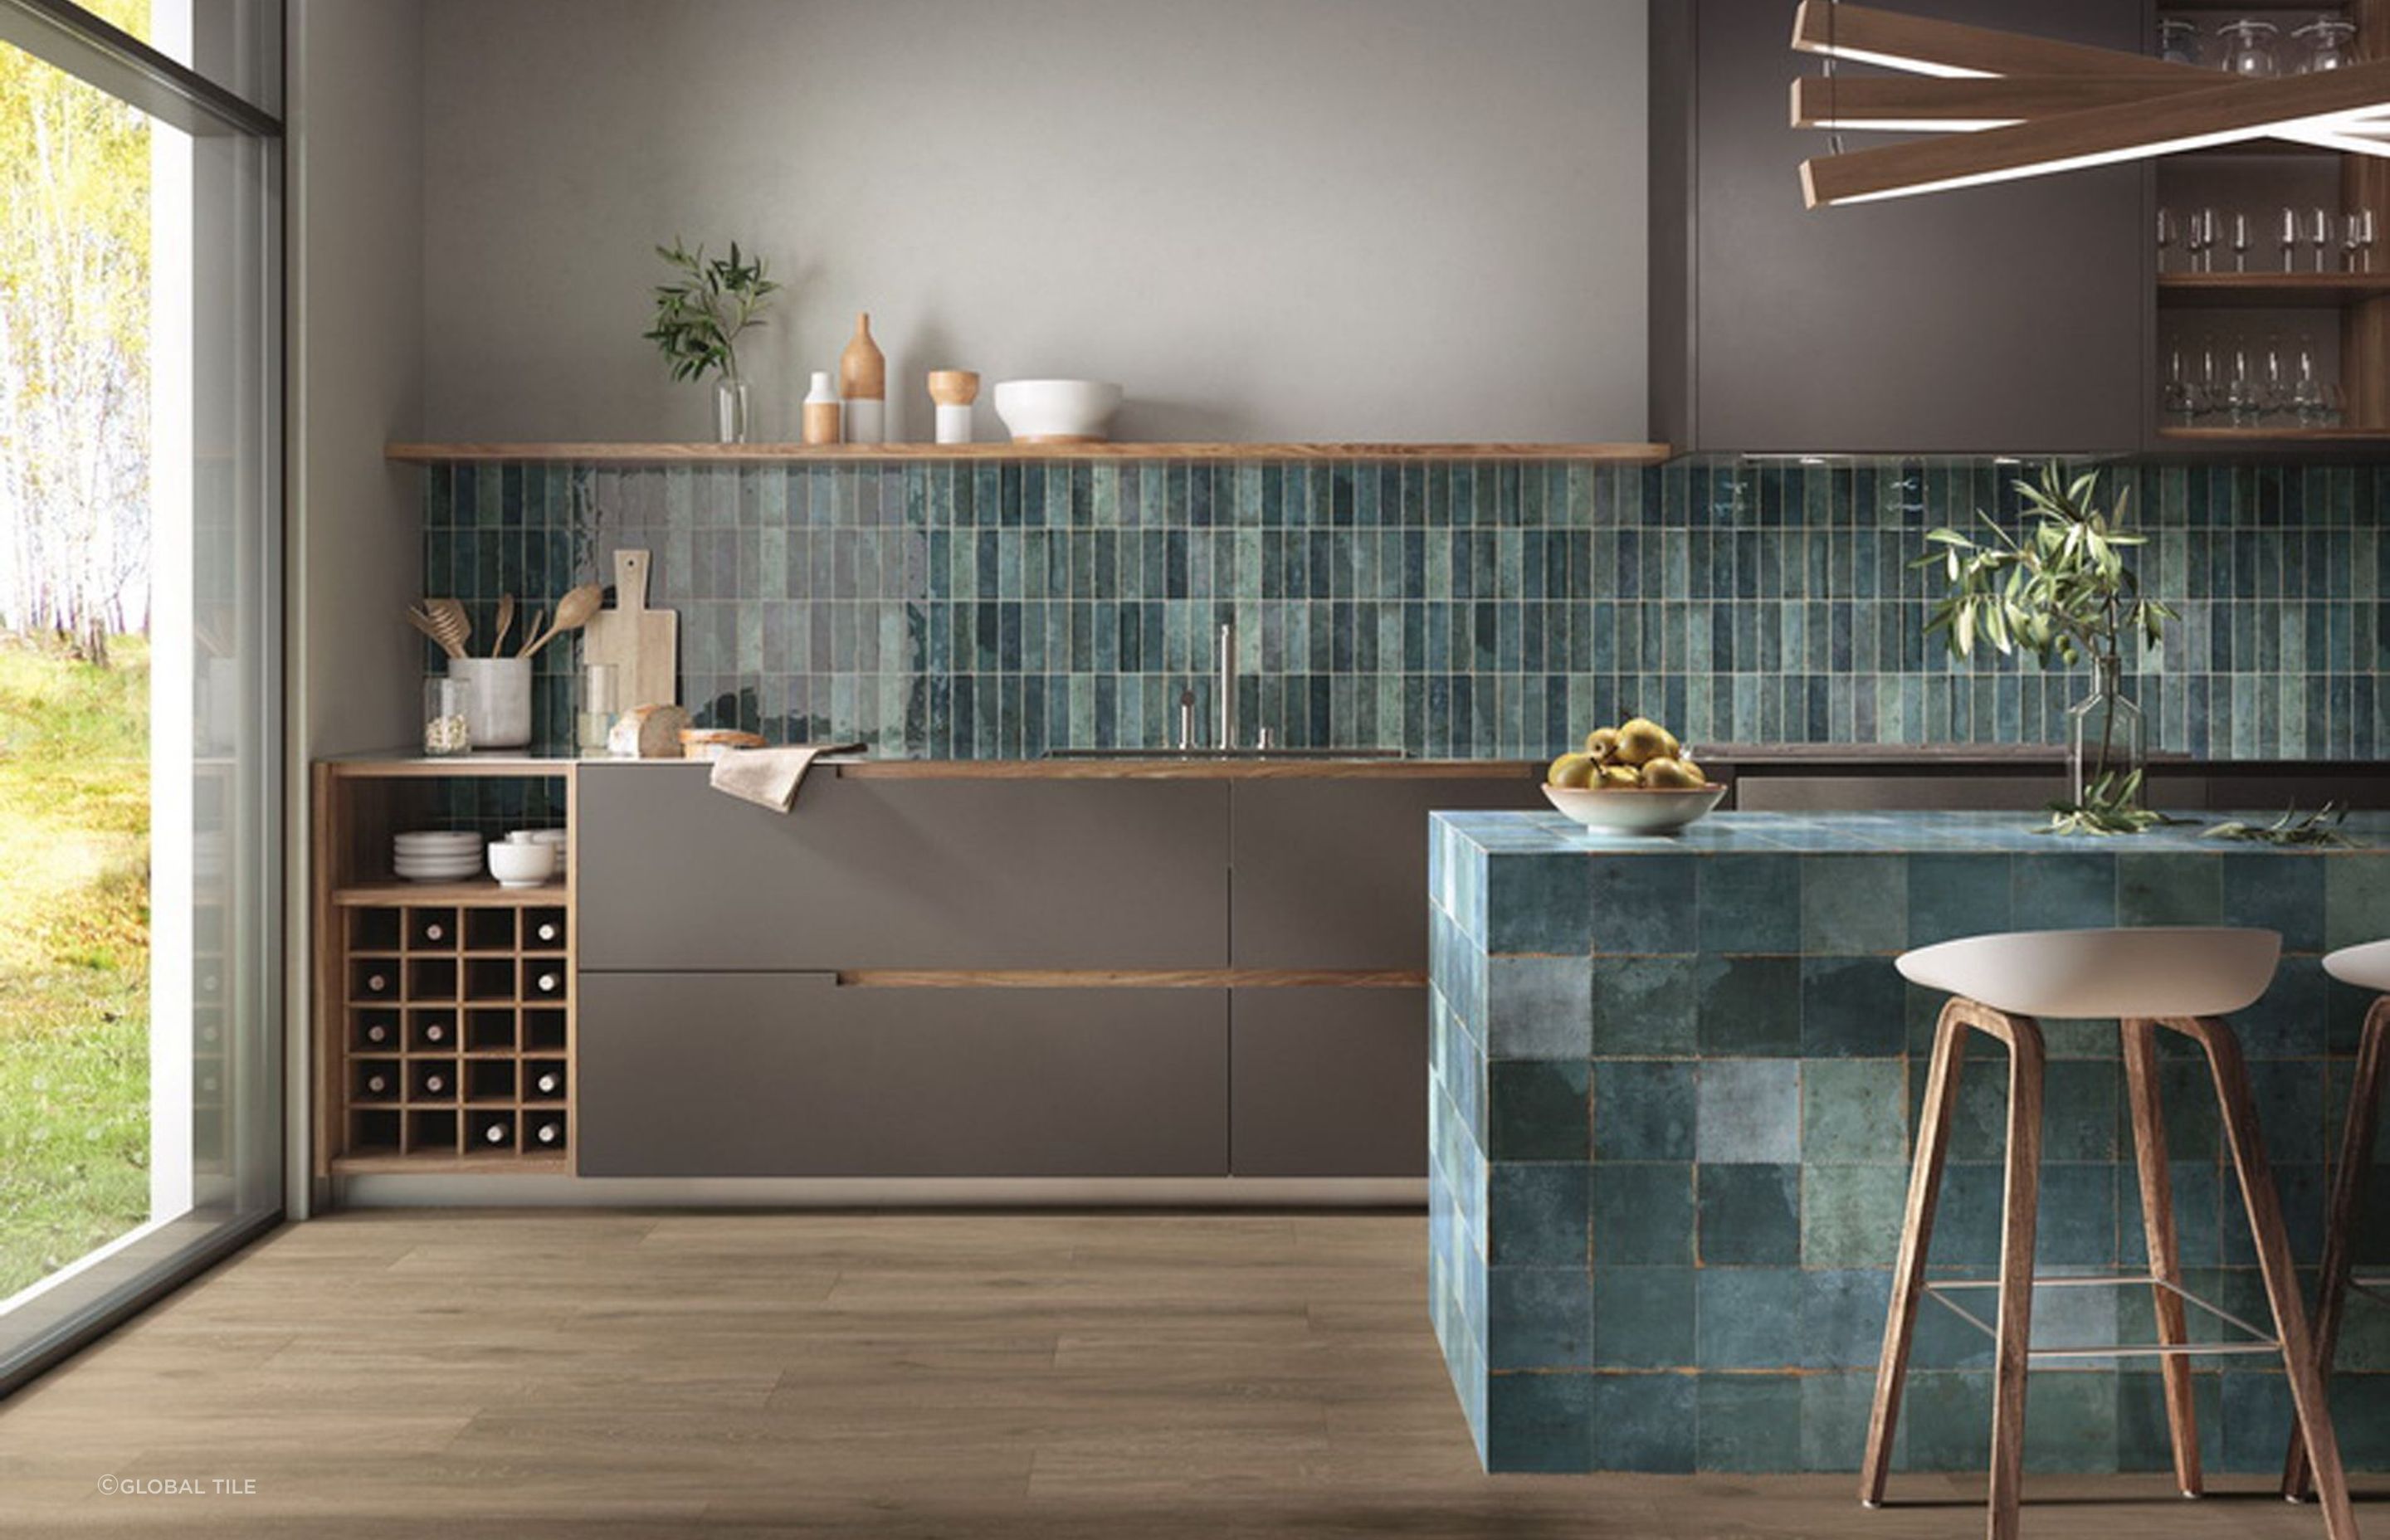 Coordinating your choice of wall tiles alongside your kitchen island, done superbly here with the Tennessee Satin Tiles, is a great way to create a cohesive look.